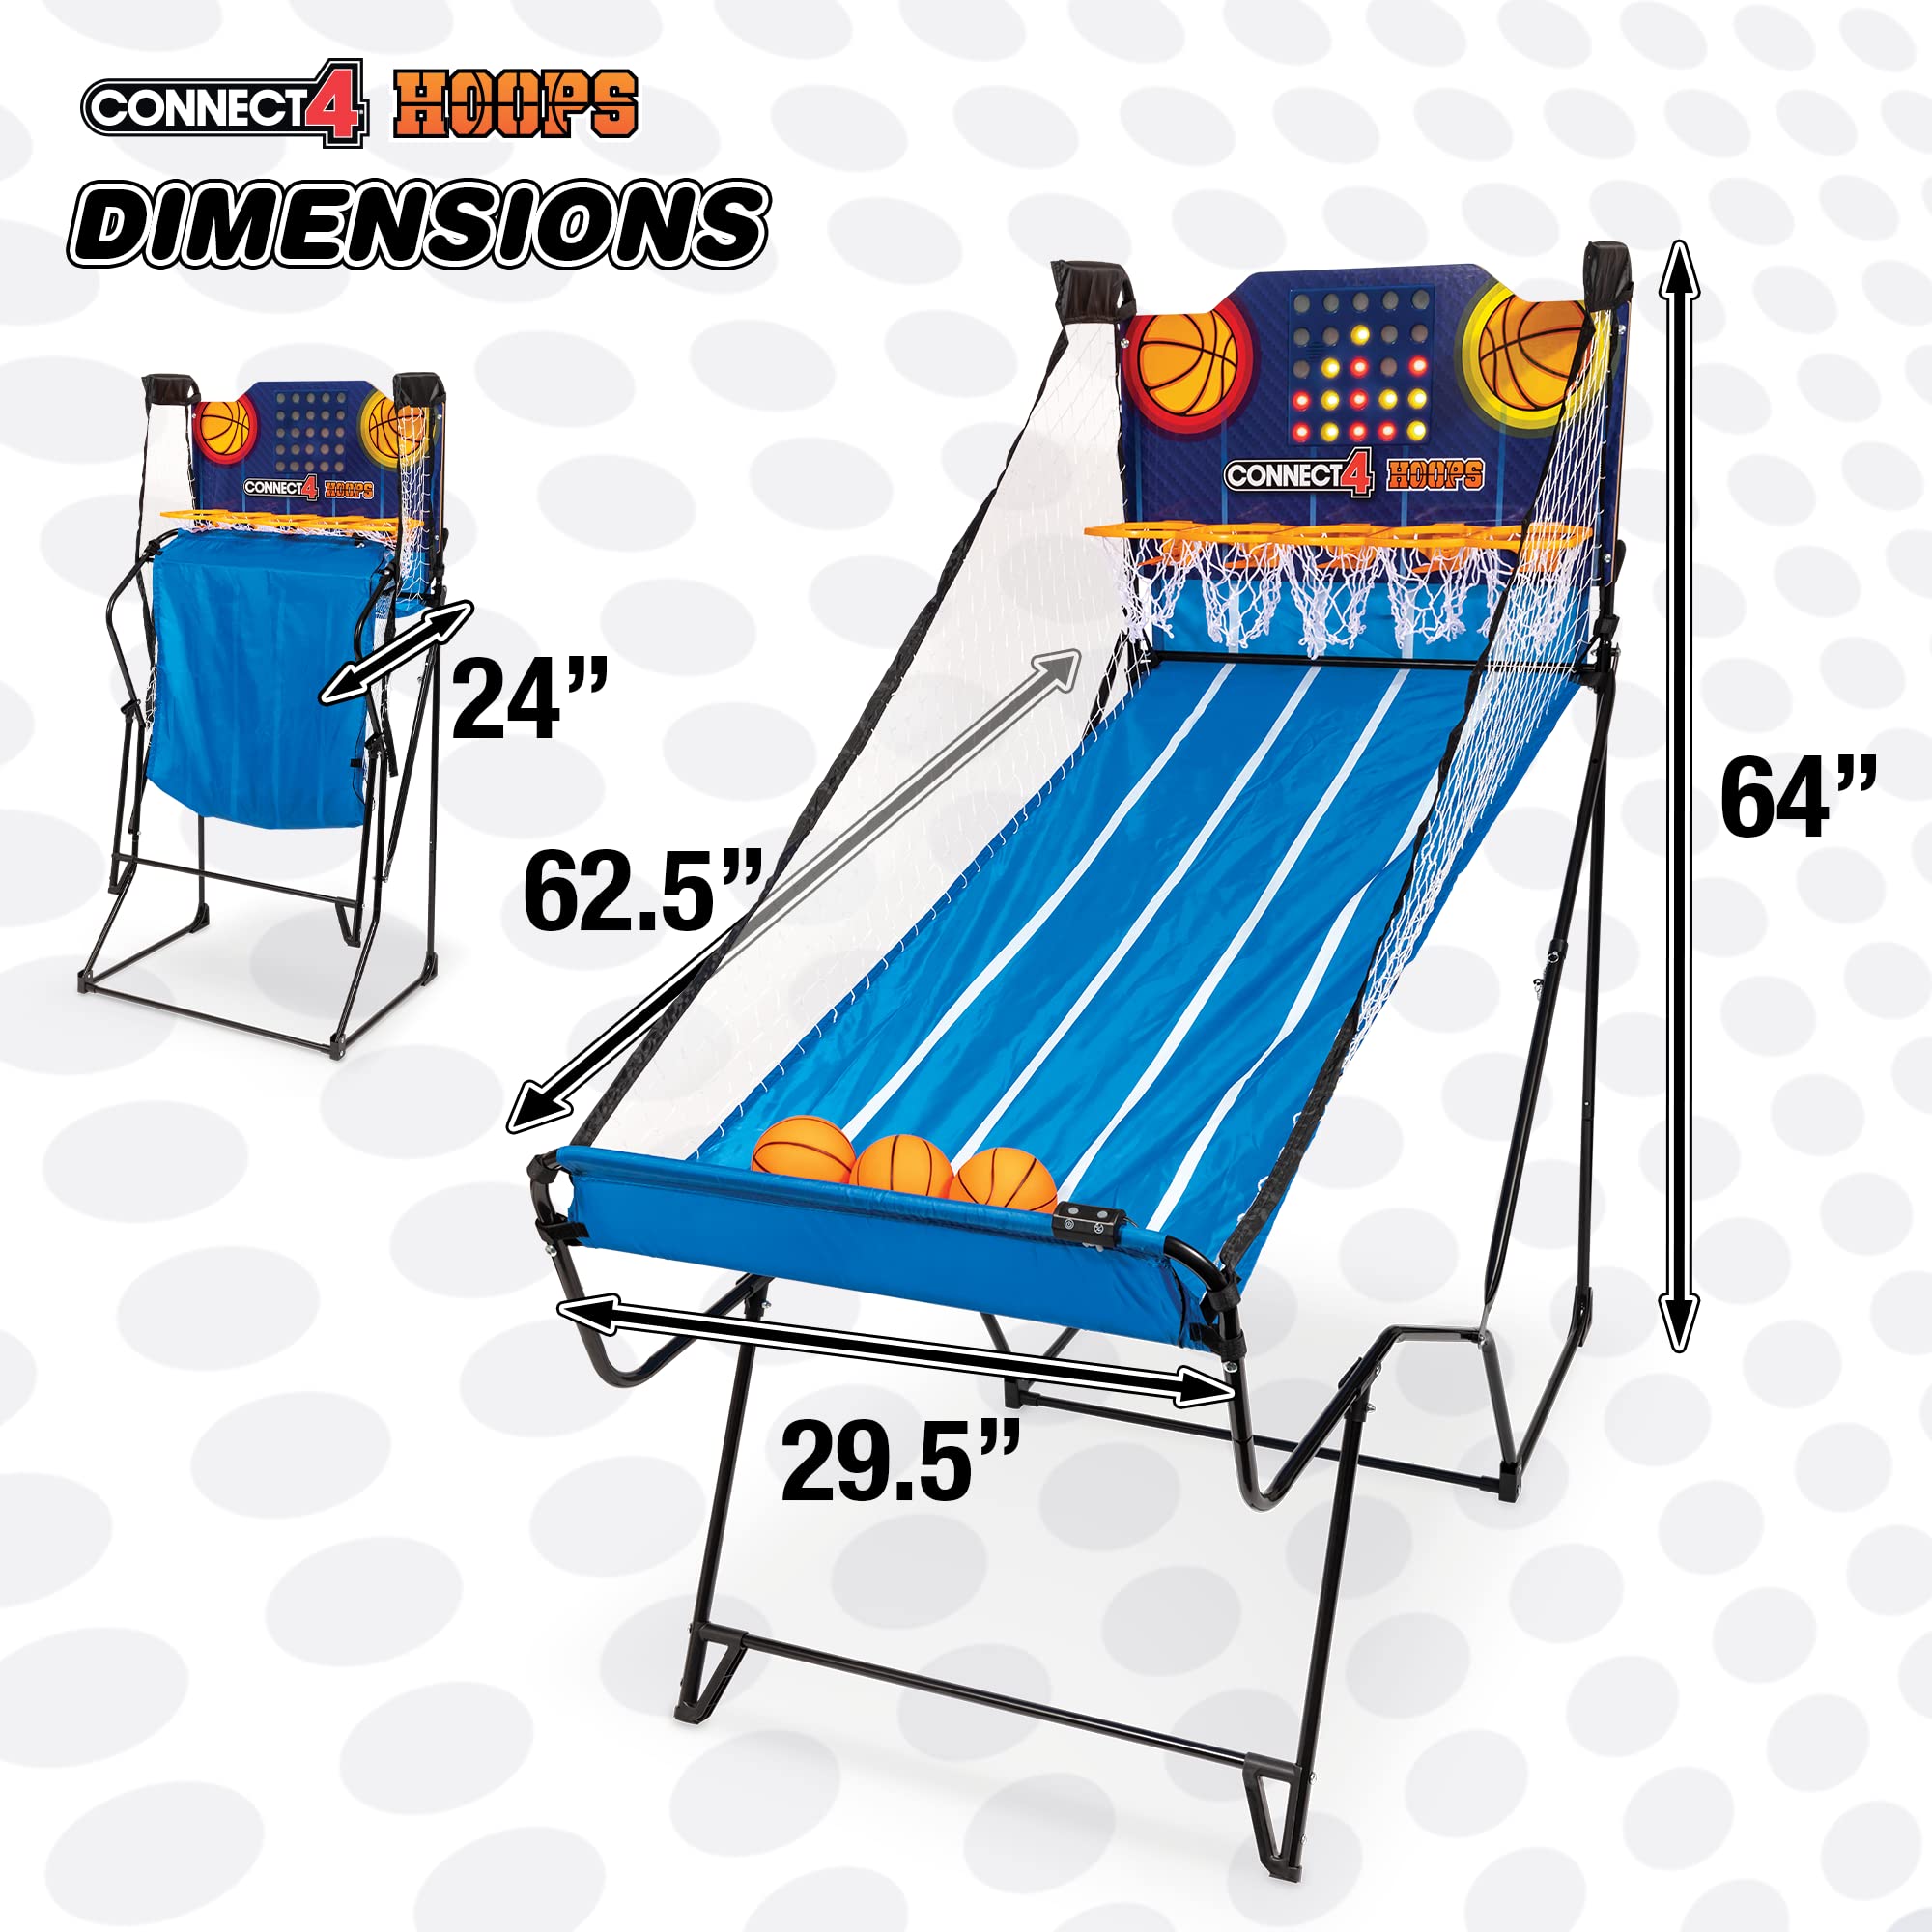 EastPoint Sports Connect 4 Hoops Indoor Basketball Arcade Game for Home, Rec Room or Man Cave - Fun for Adults, Kids & Family